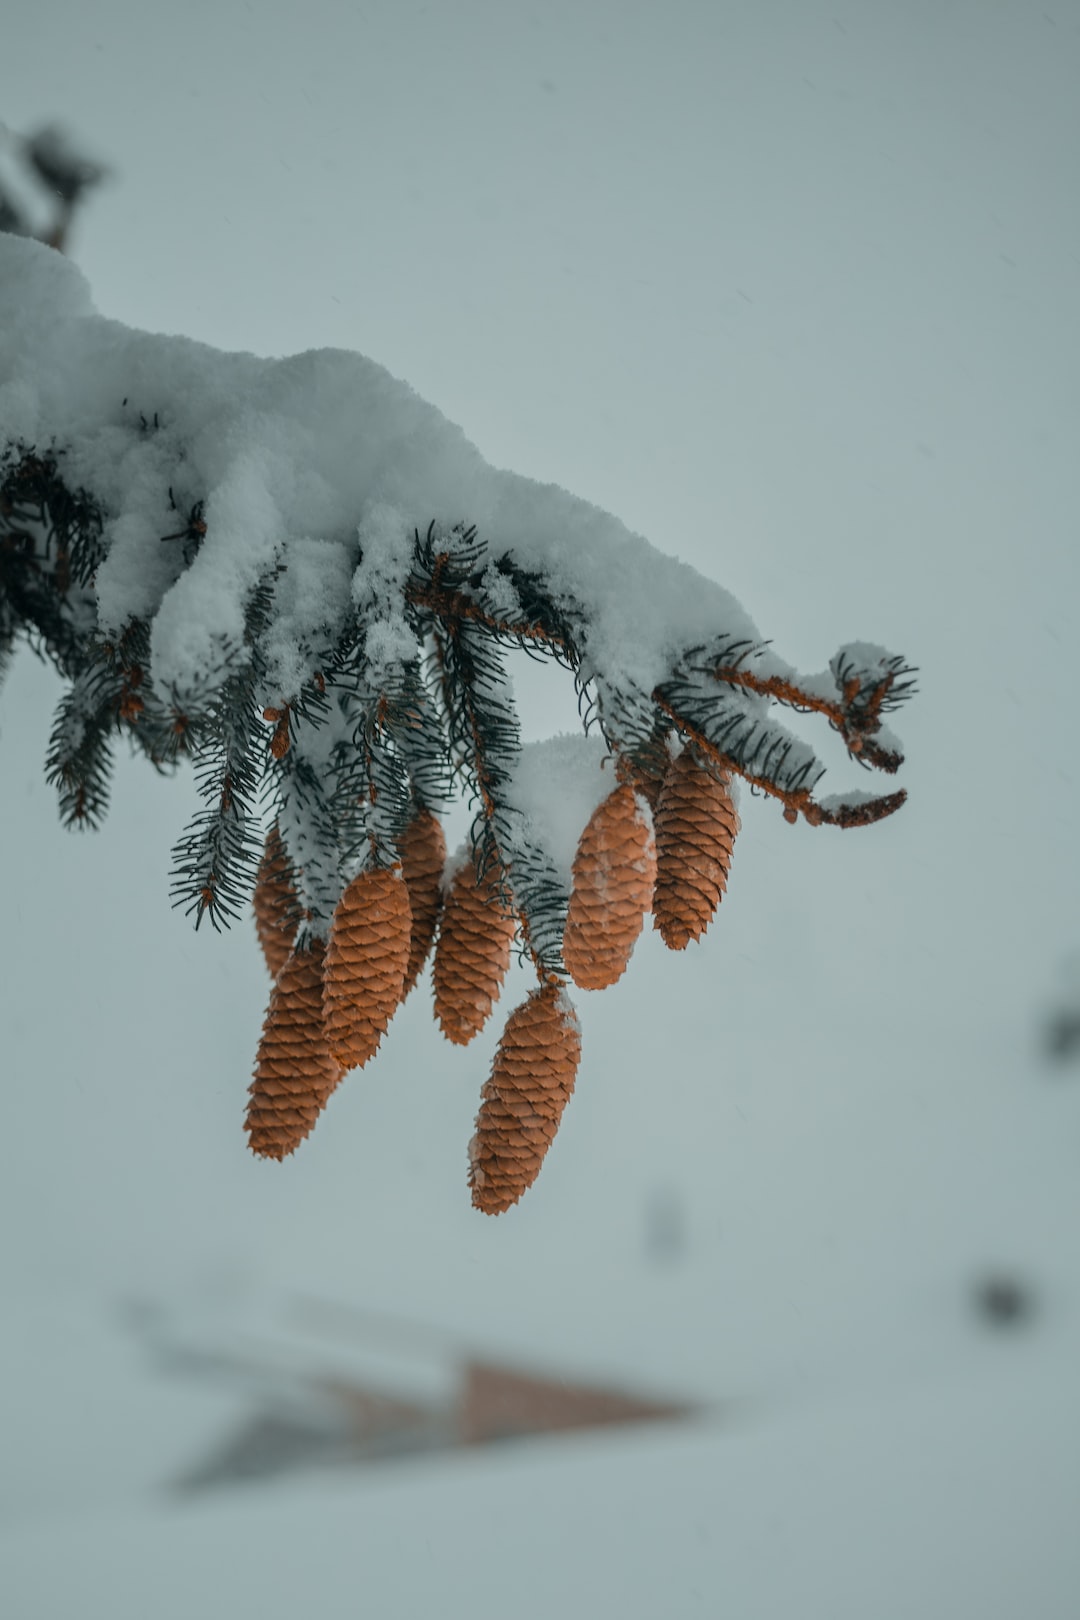 tir cones hanging off a branch while snowfall in winter